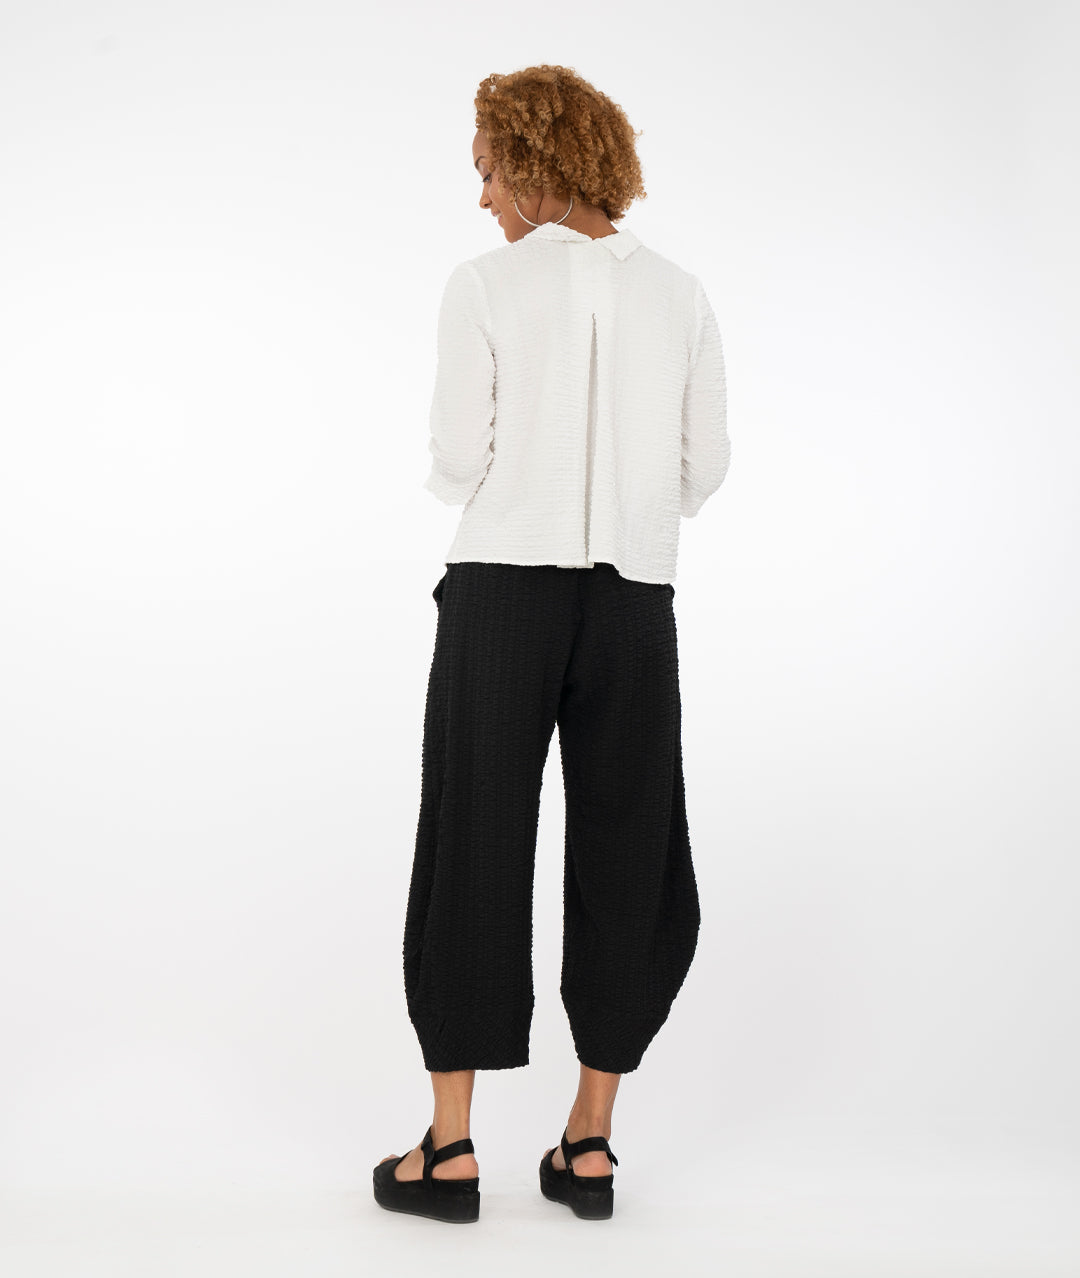 model with a white button up shirt with a black pant in front of a white back ground